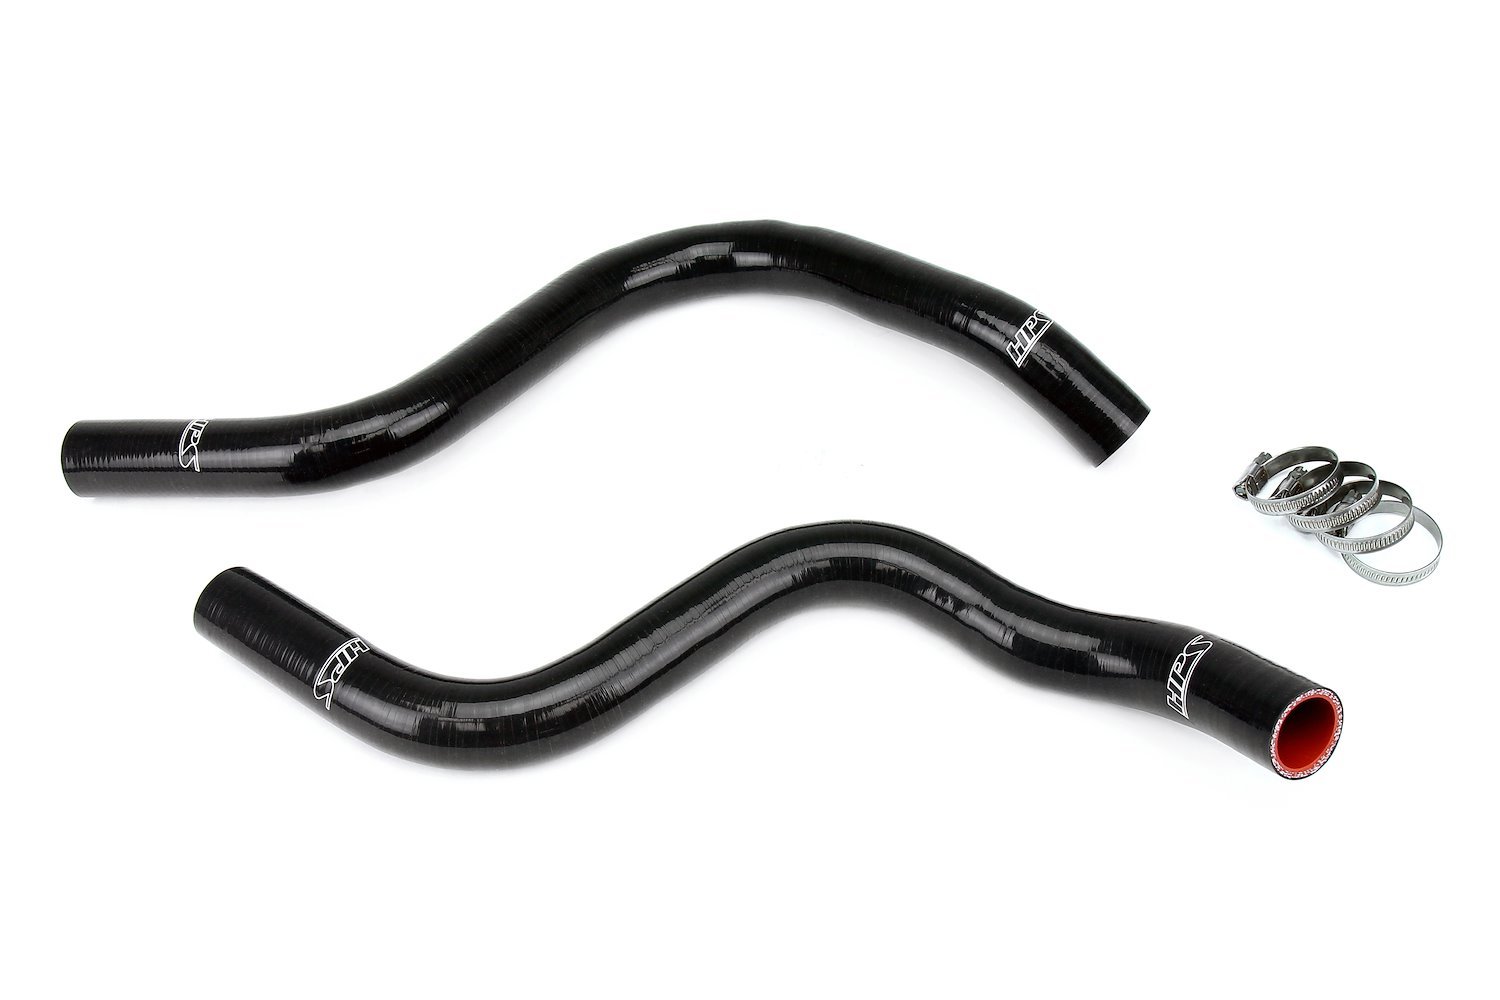 57-1817-BLK Radiator Hose Kit, 3-Ply Reinforced Silicone, Replaces Rubber Radiator Coolant Hoses